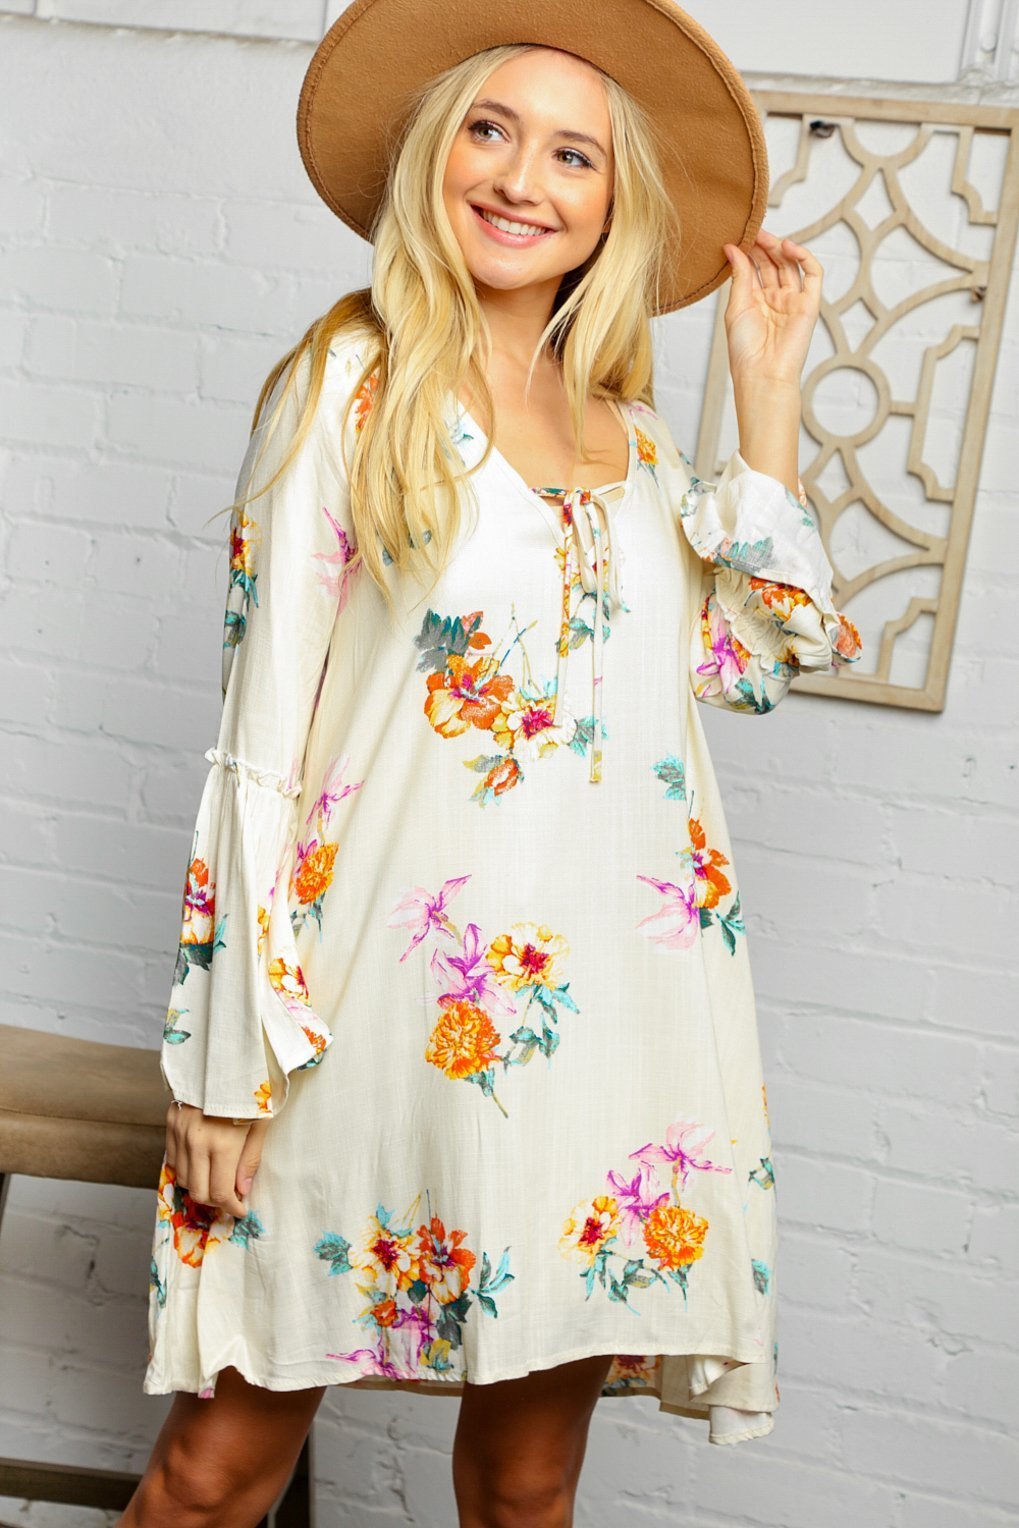 Cream Floral Bell Sleeve Lined Dress